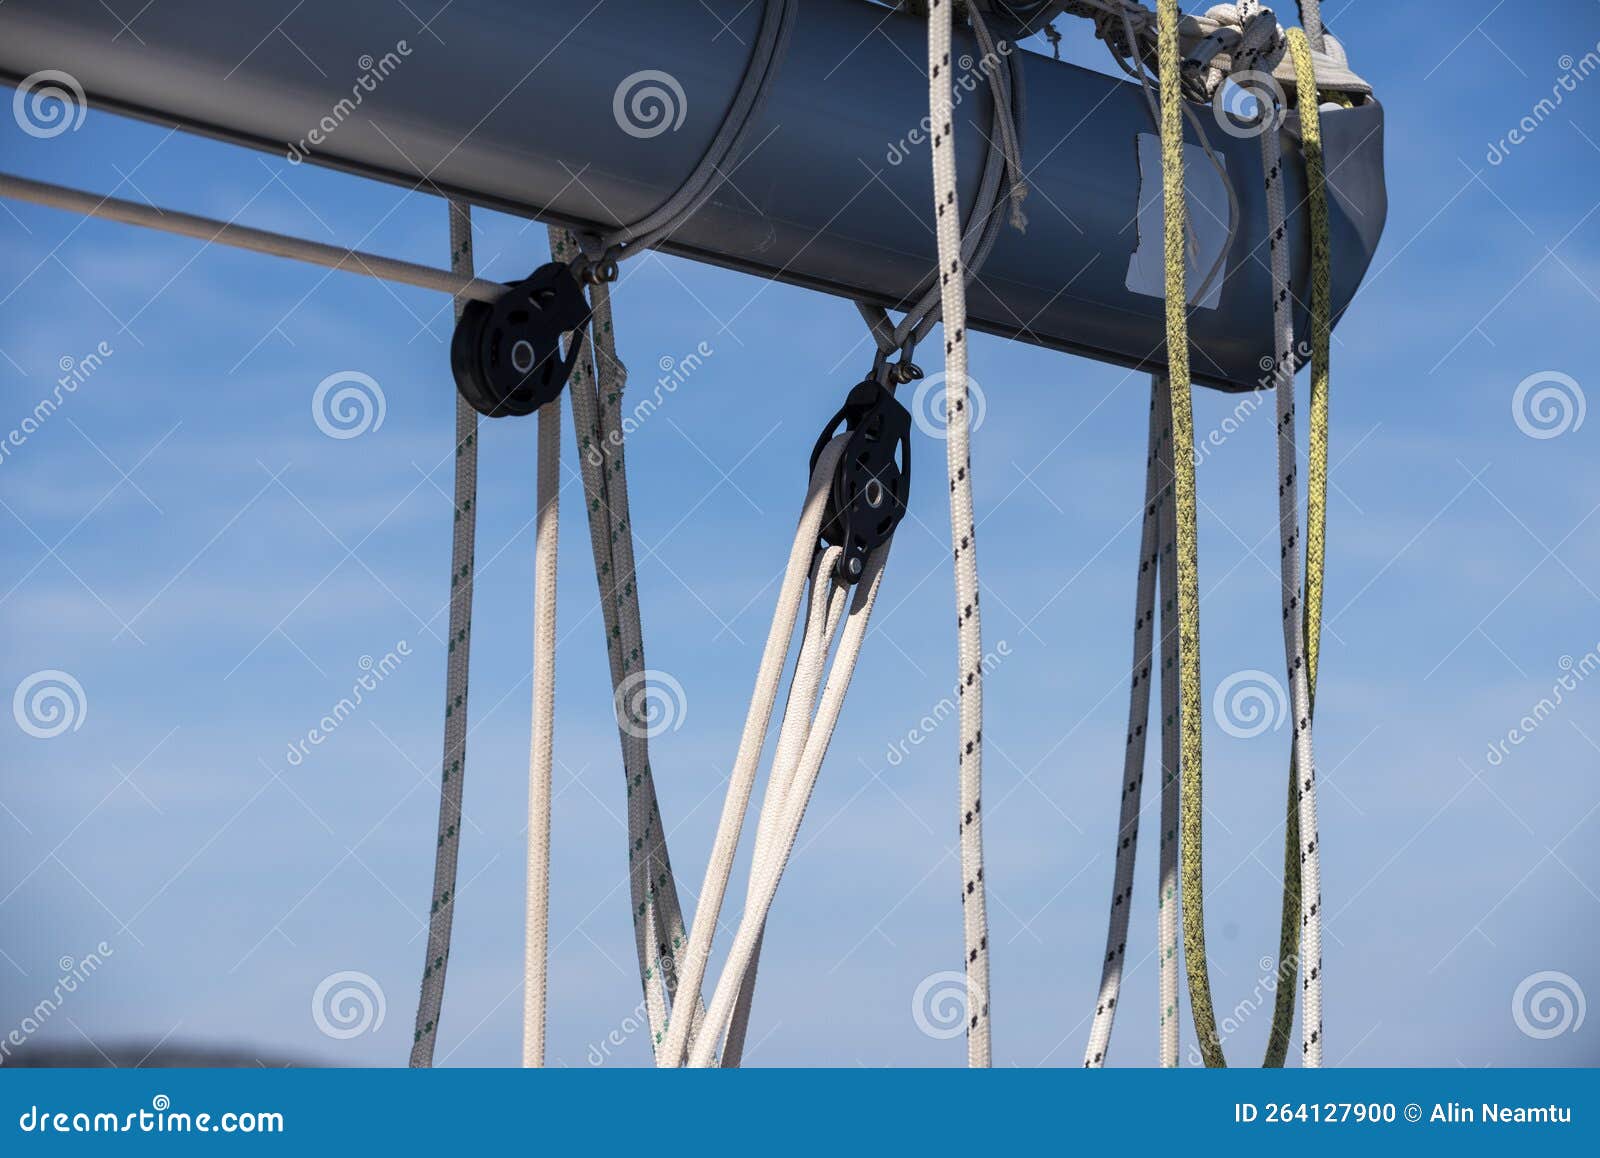 Sailing Boat Lines Close Up with Boom Stock Photo - Image of lines